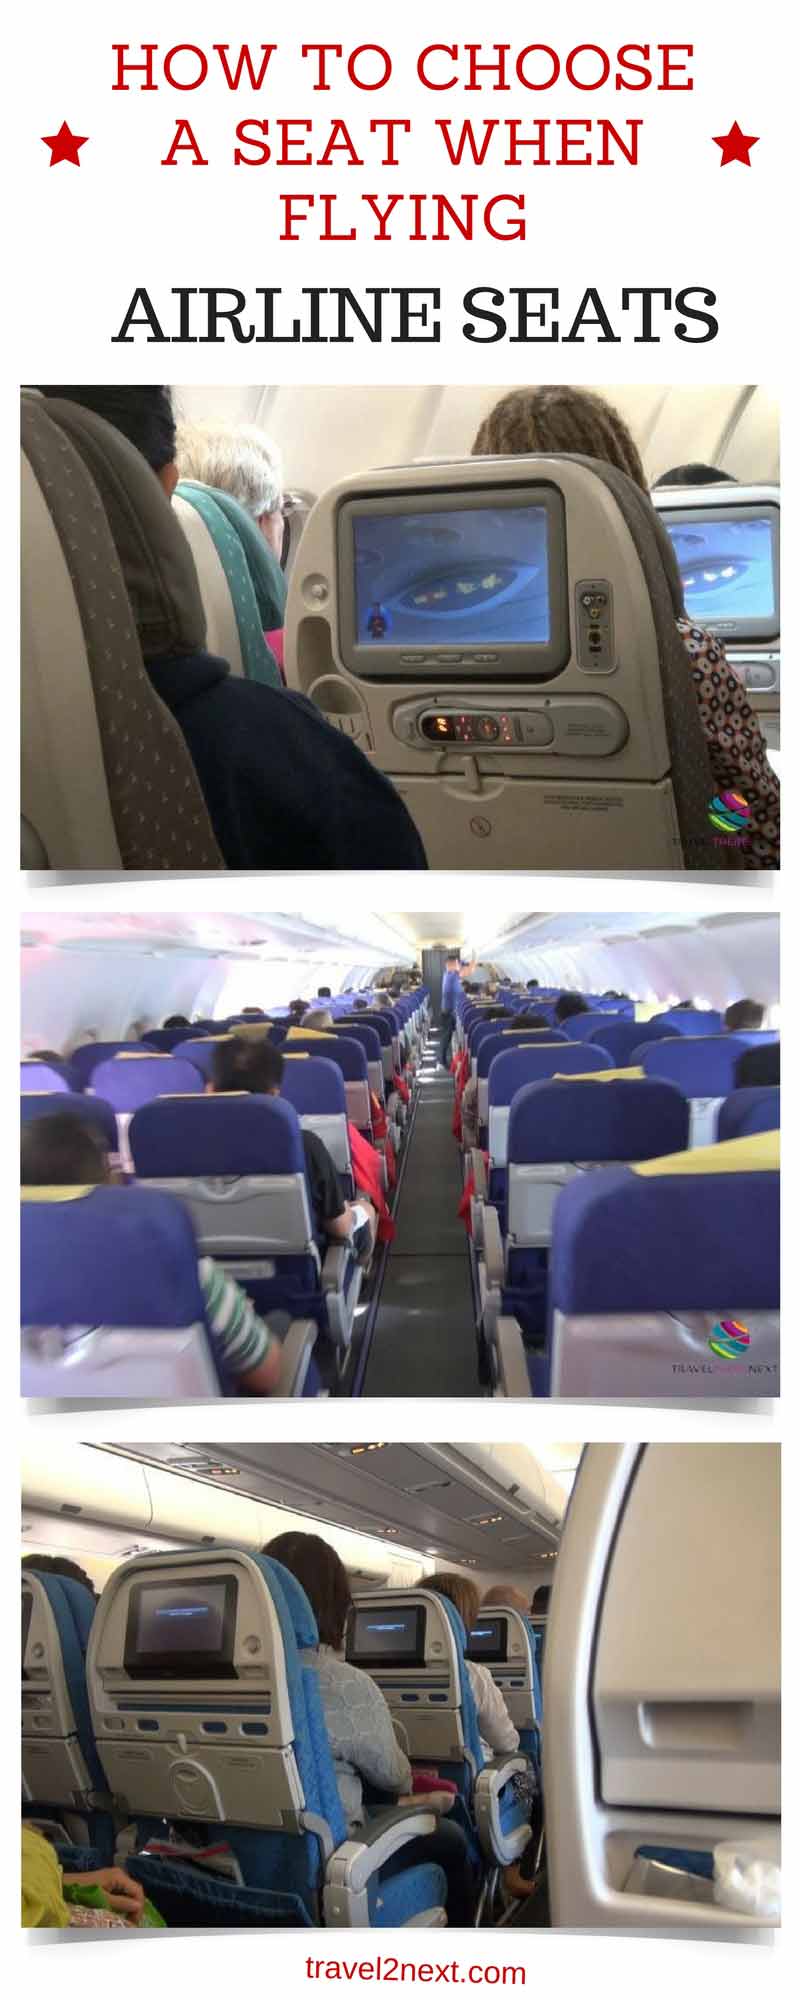 How to choose a seat when flying